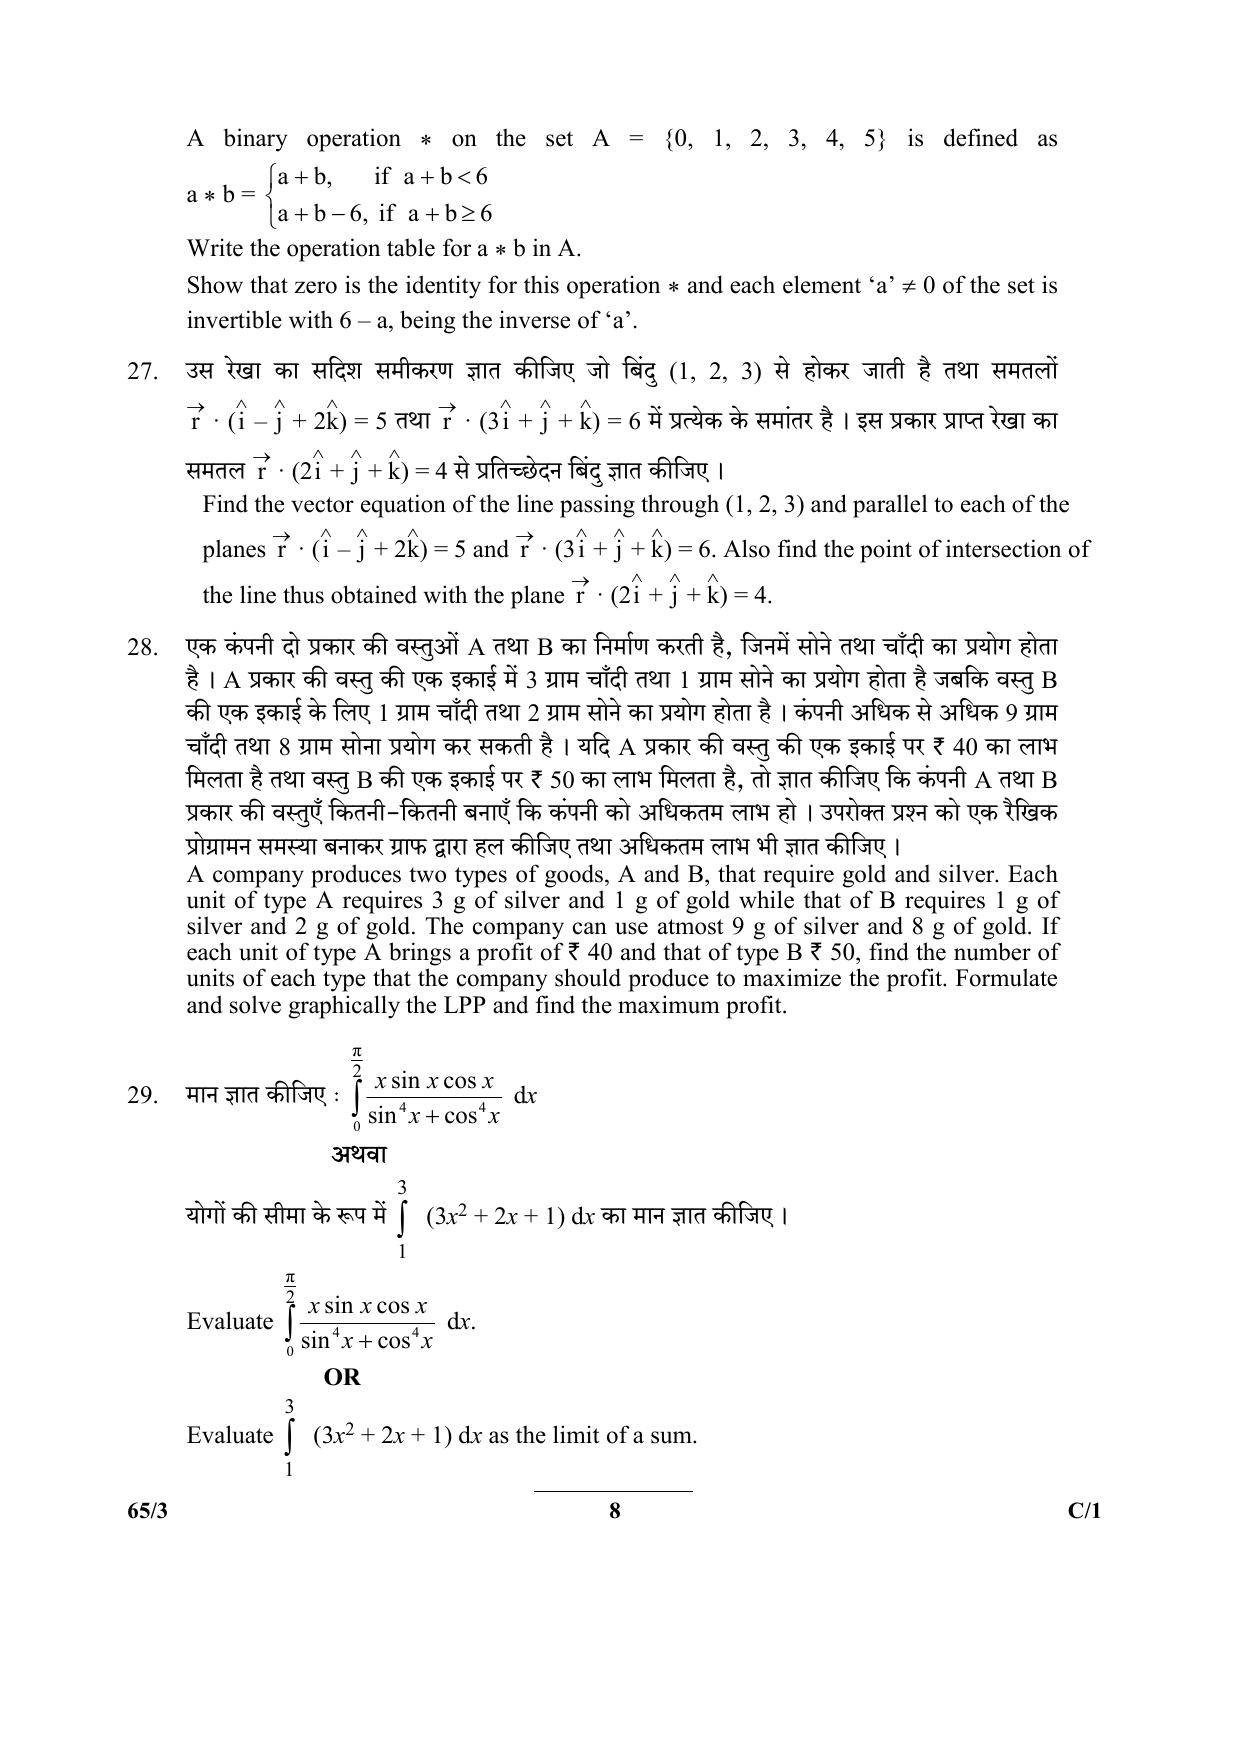 CBSE Class 12 65-3 (Mathematics) 2018 Compartment Question Paper - Page 8